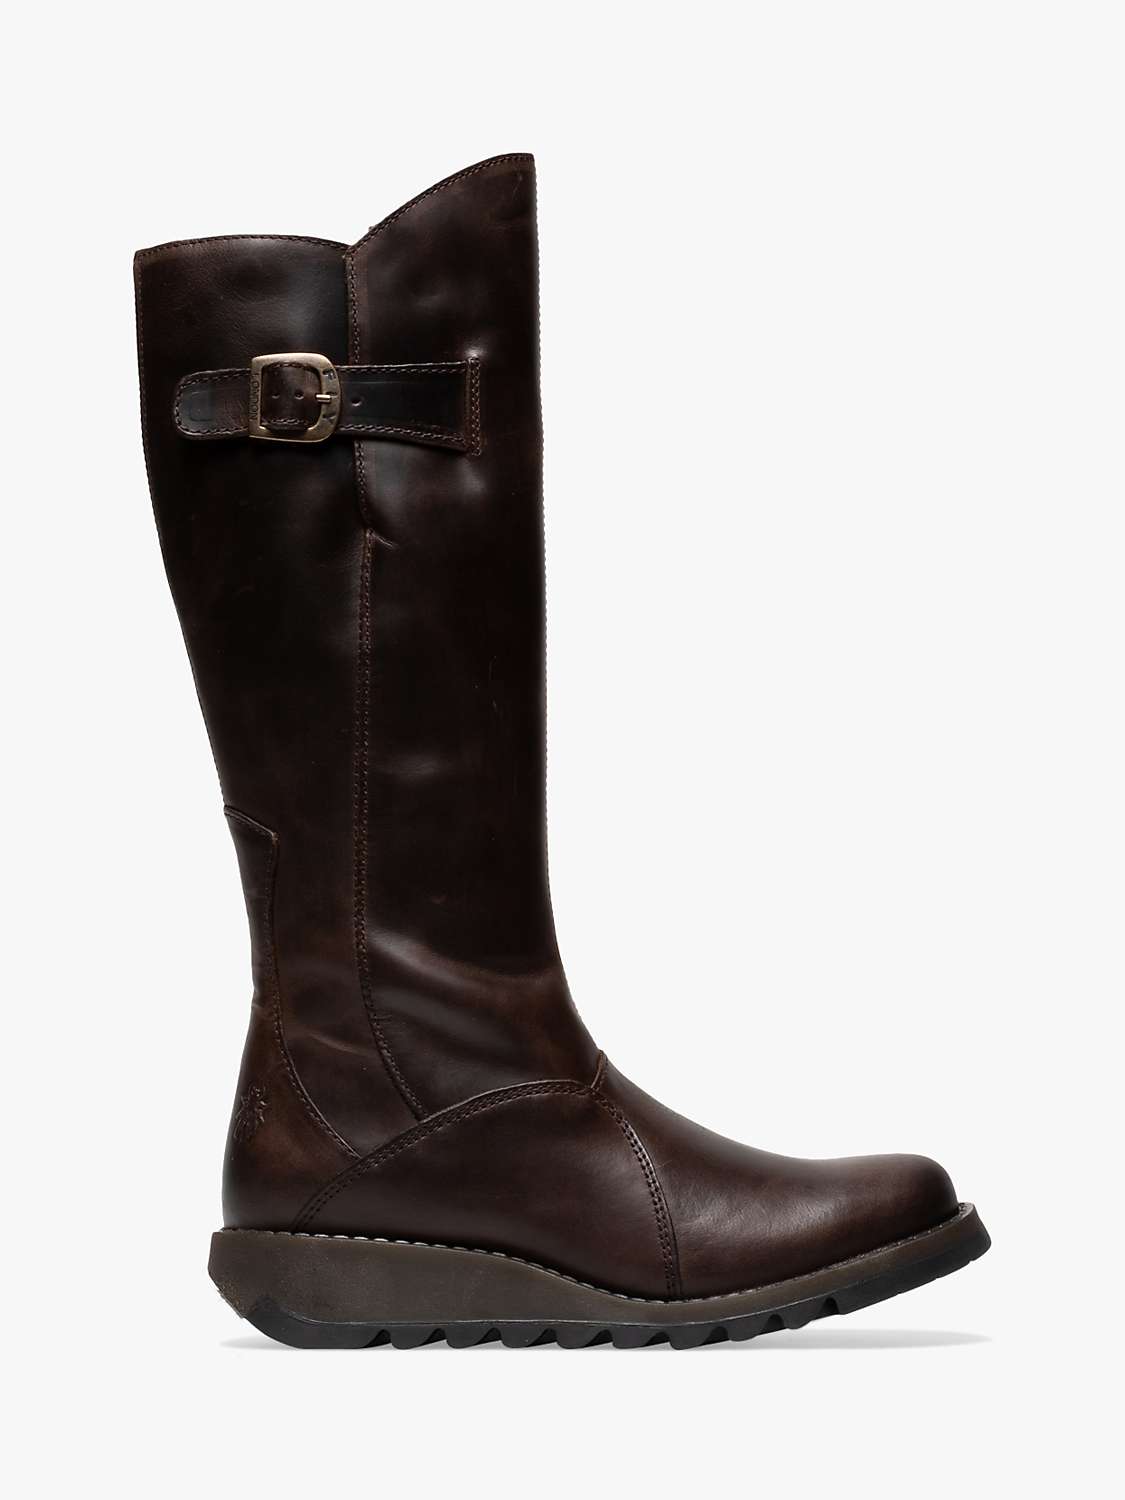 Buy Fly London Mol 2 Leather Buckle Long Boots Online at johnlewis.com